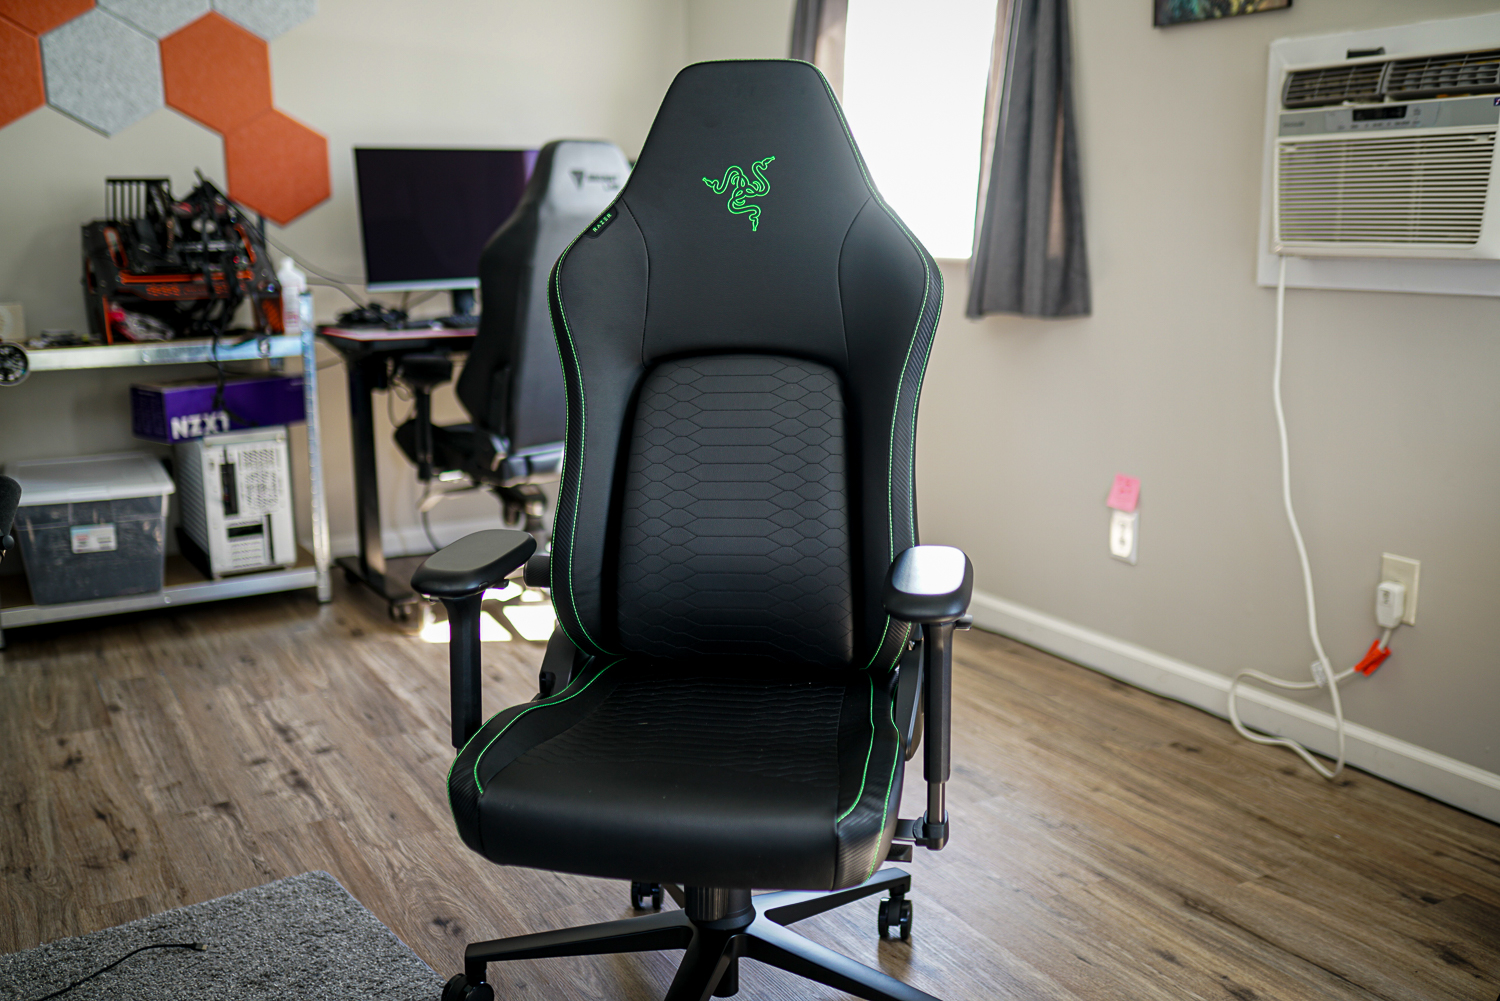 The Razer Iskur V2 chair sitting in an office.